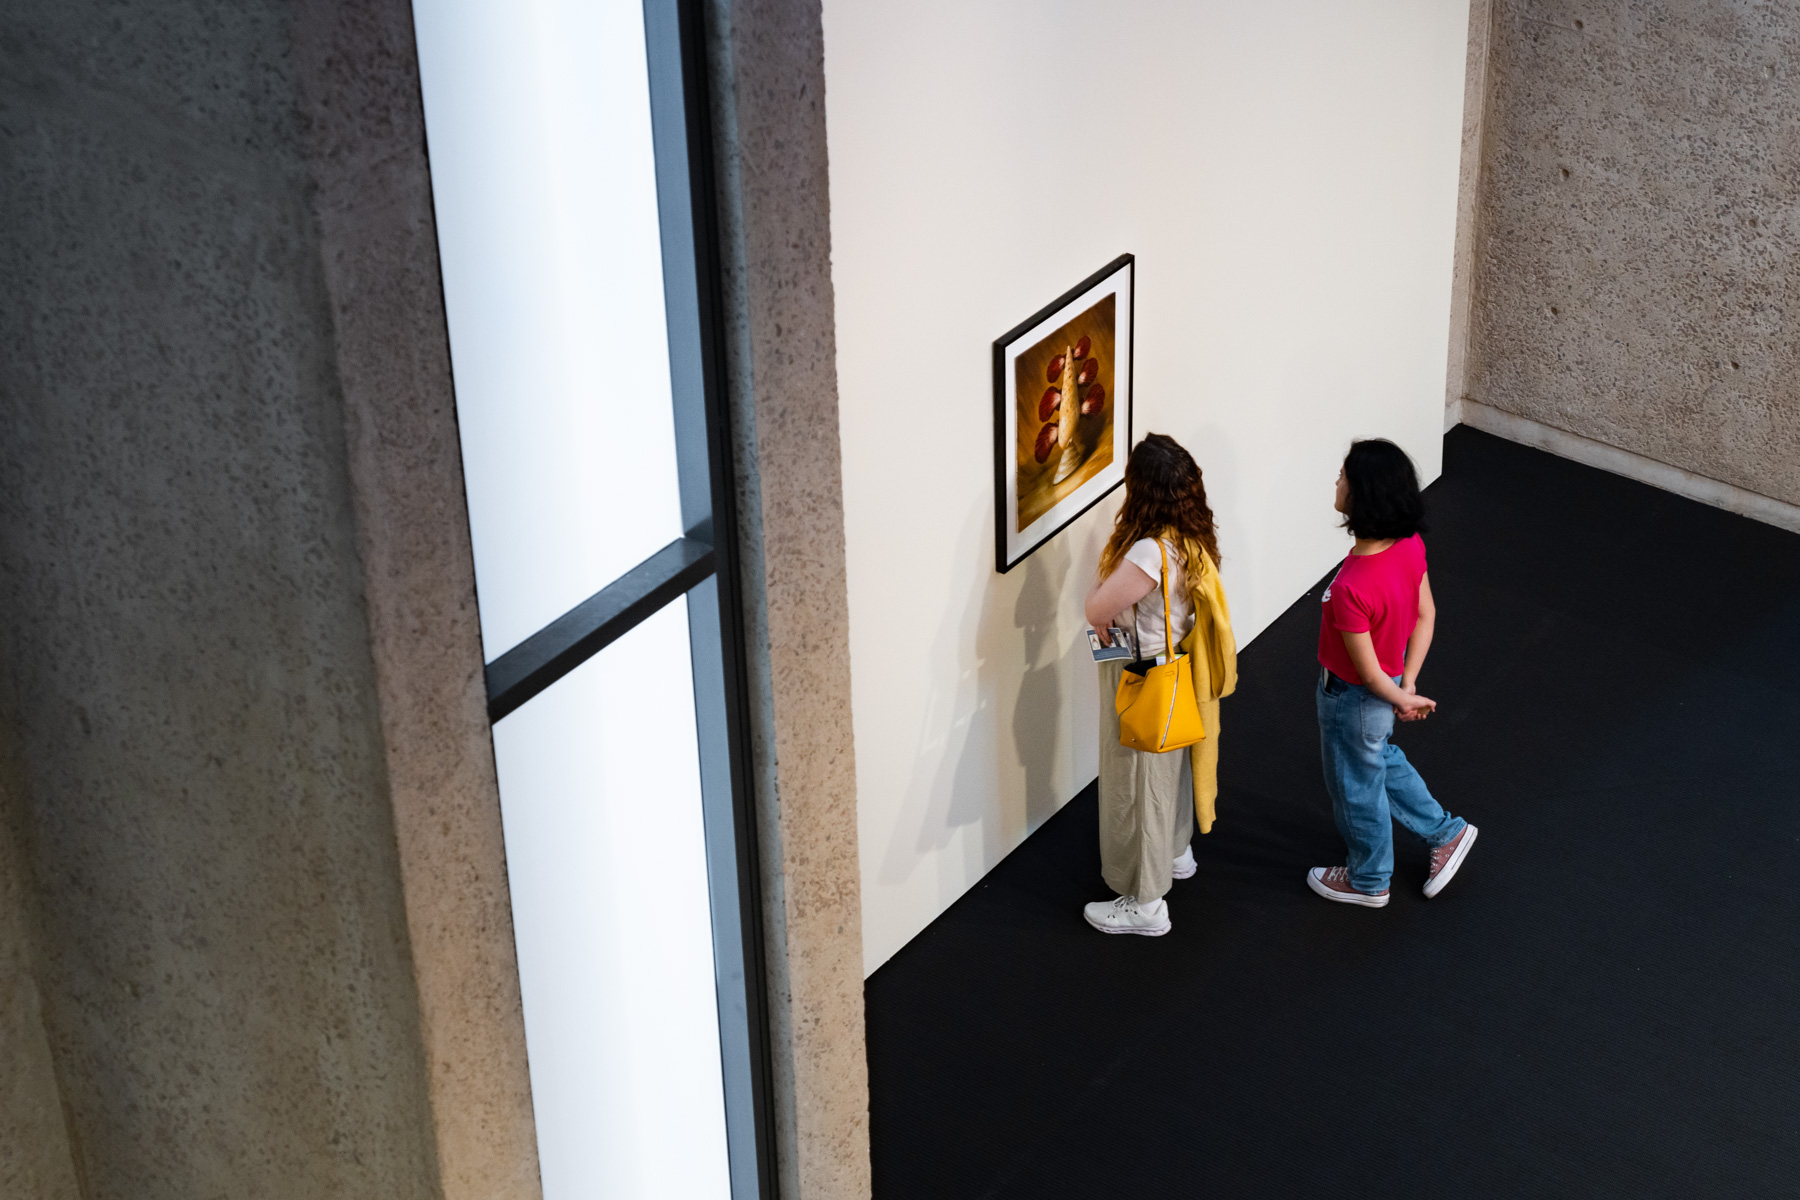 Two people viewed from above look at an artwork in a gallery space